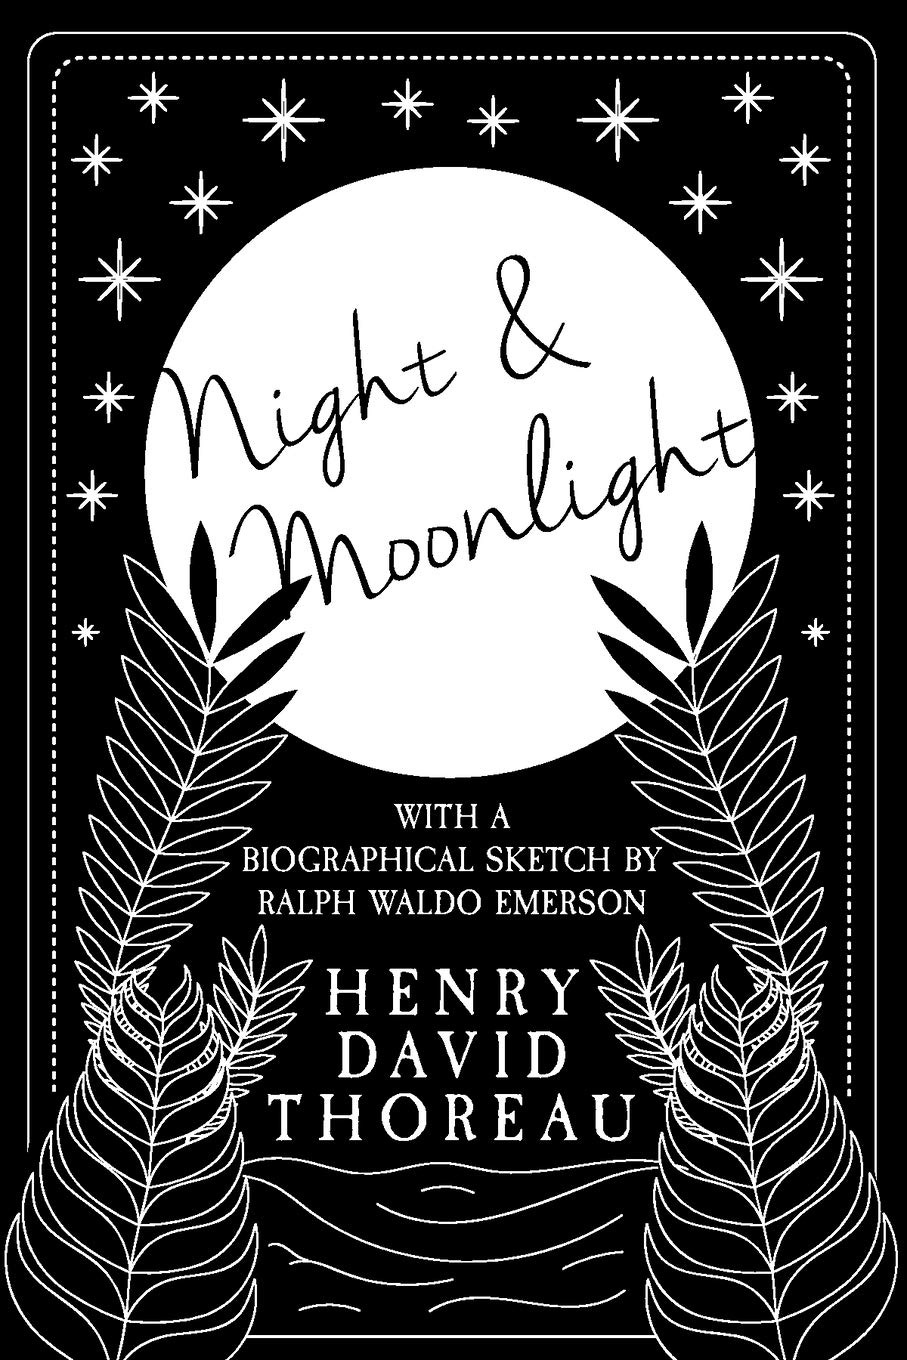 The cover of Thoreau's book Night and Moonlight.